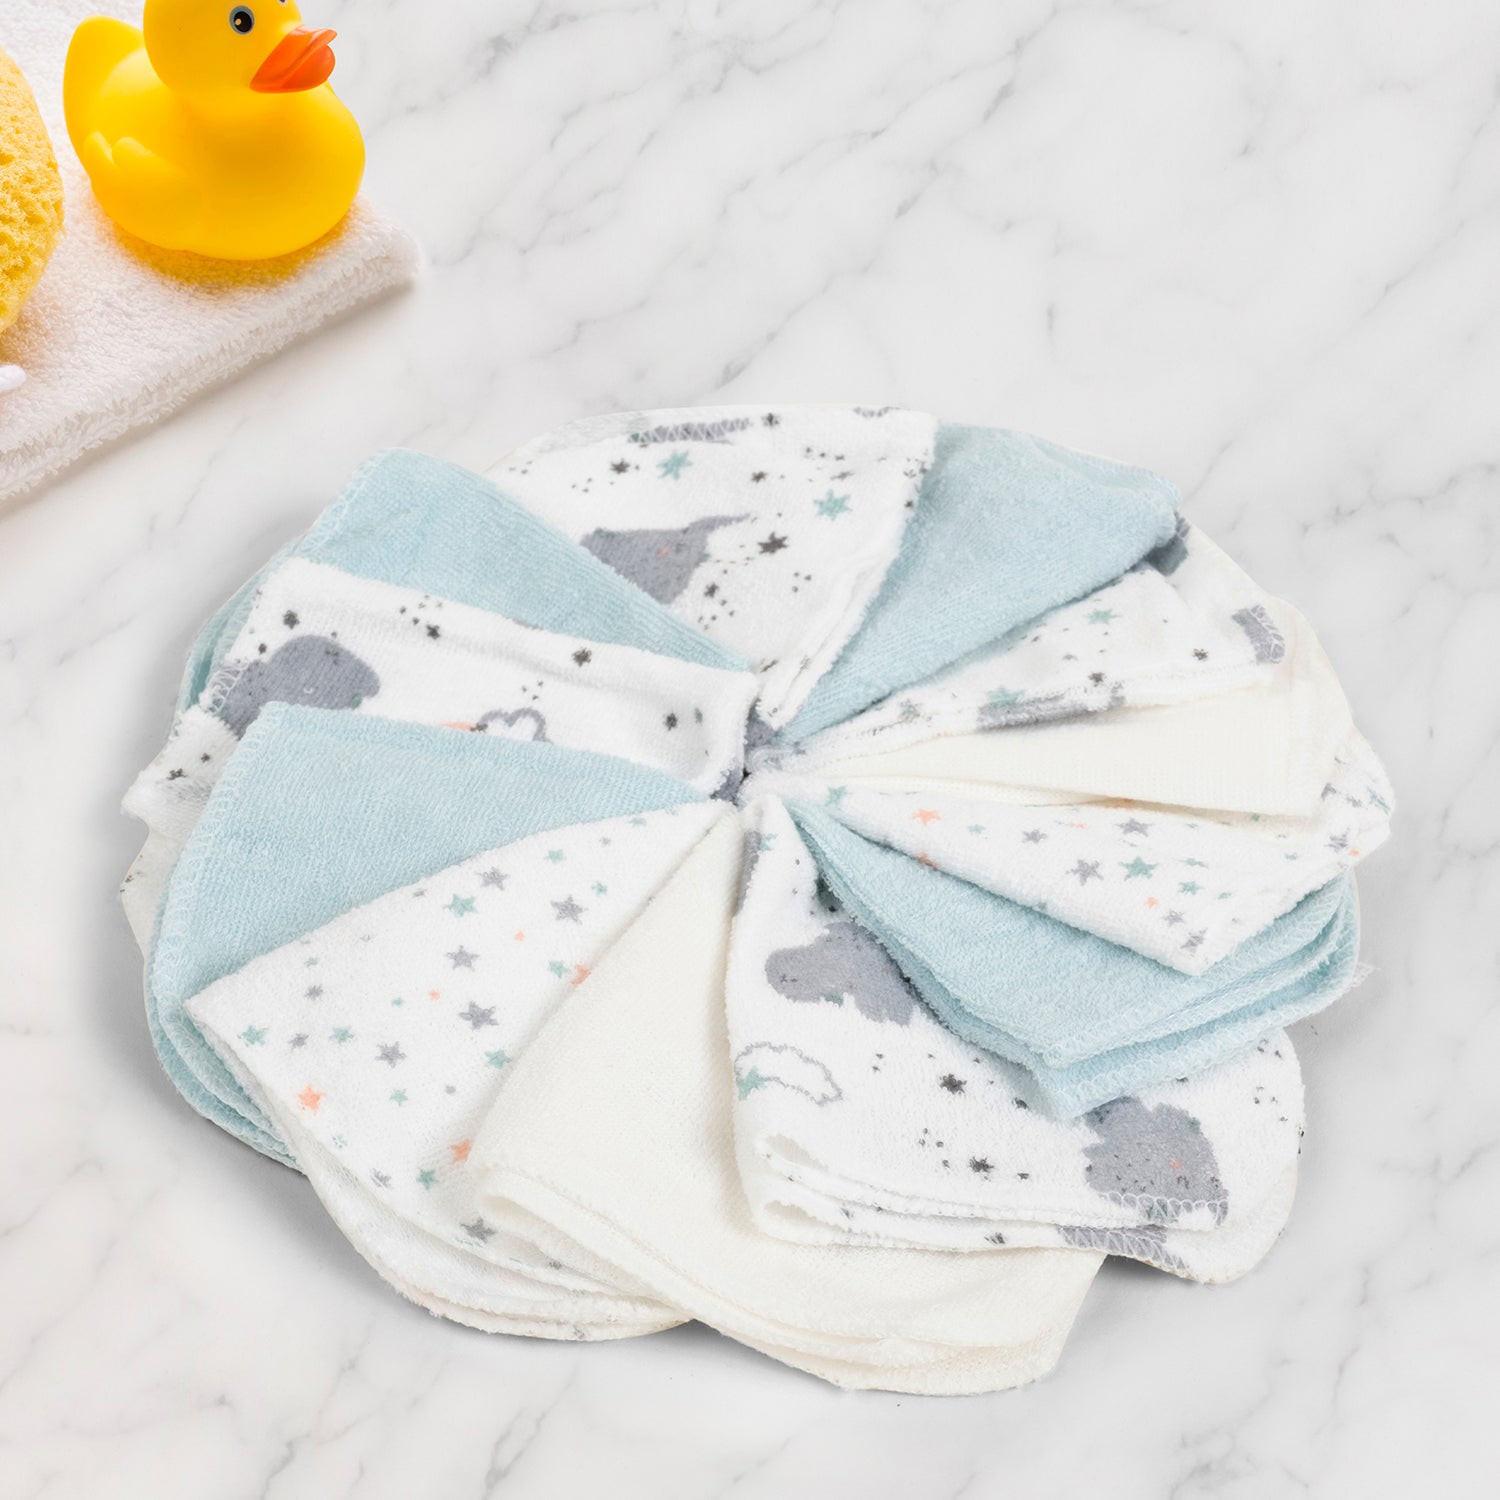 Baby Moo Elephant And Star Soft And Absorbent Handkerchief Napkins For Infant Face And Body Pack Of 12 Wash Cloth - Blue